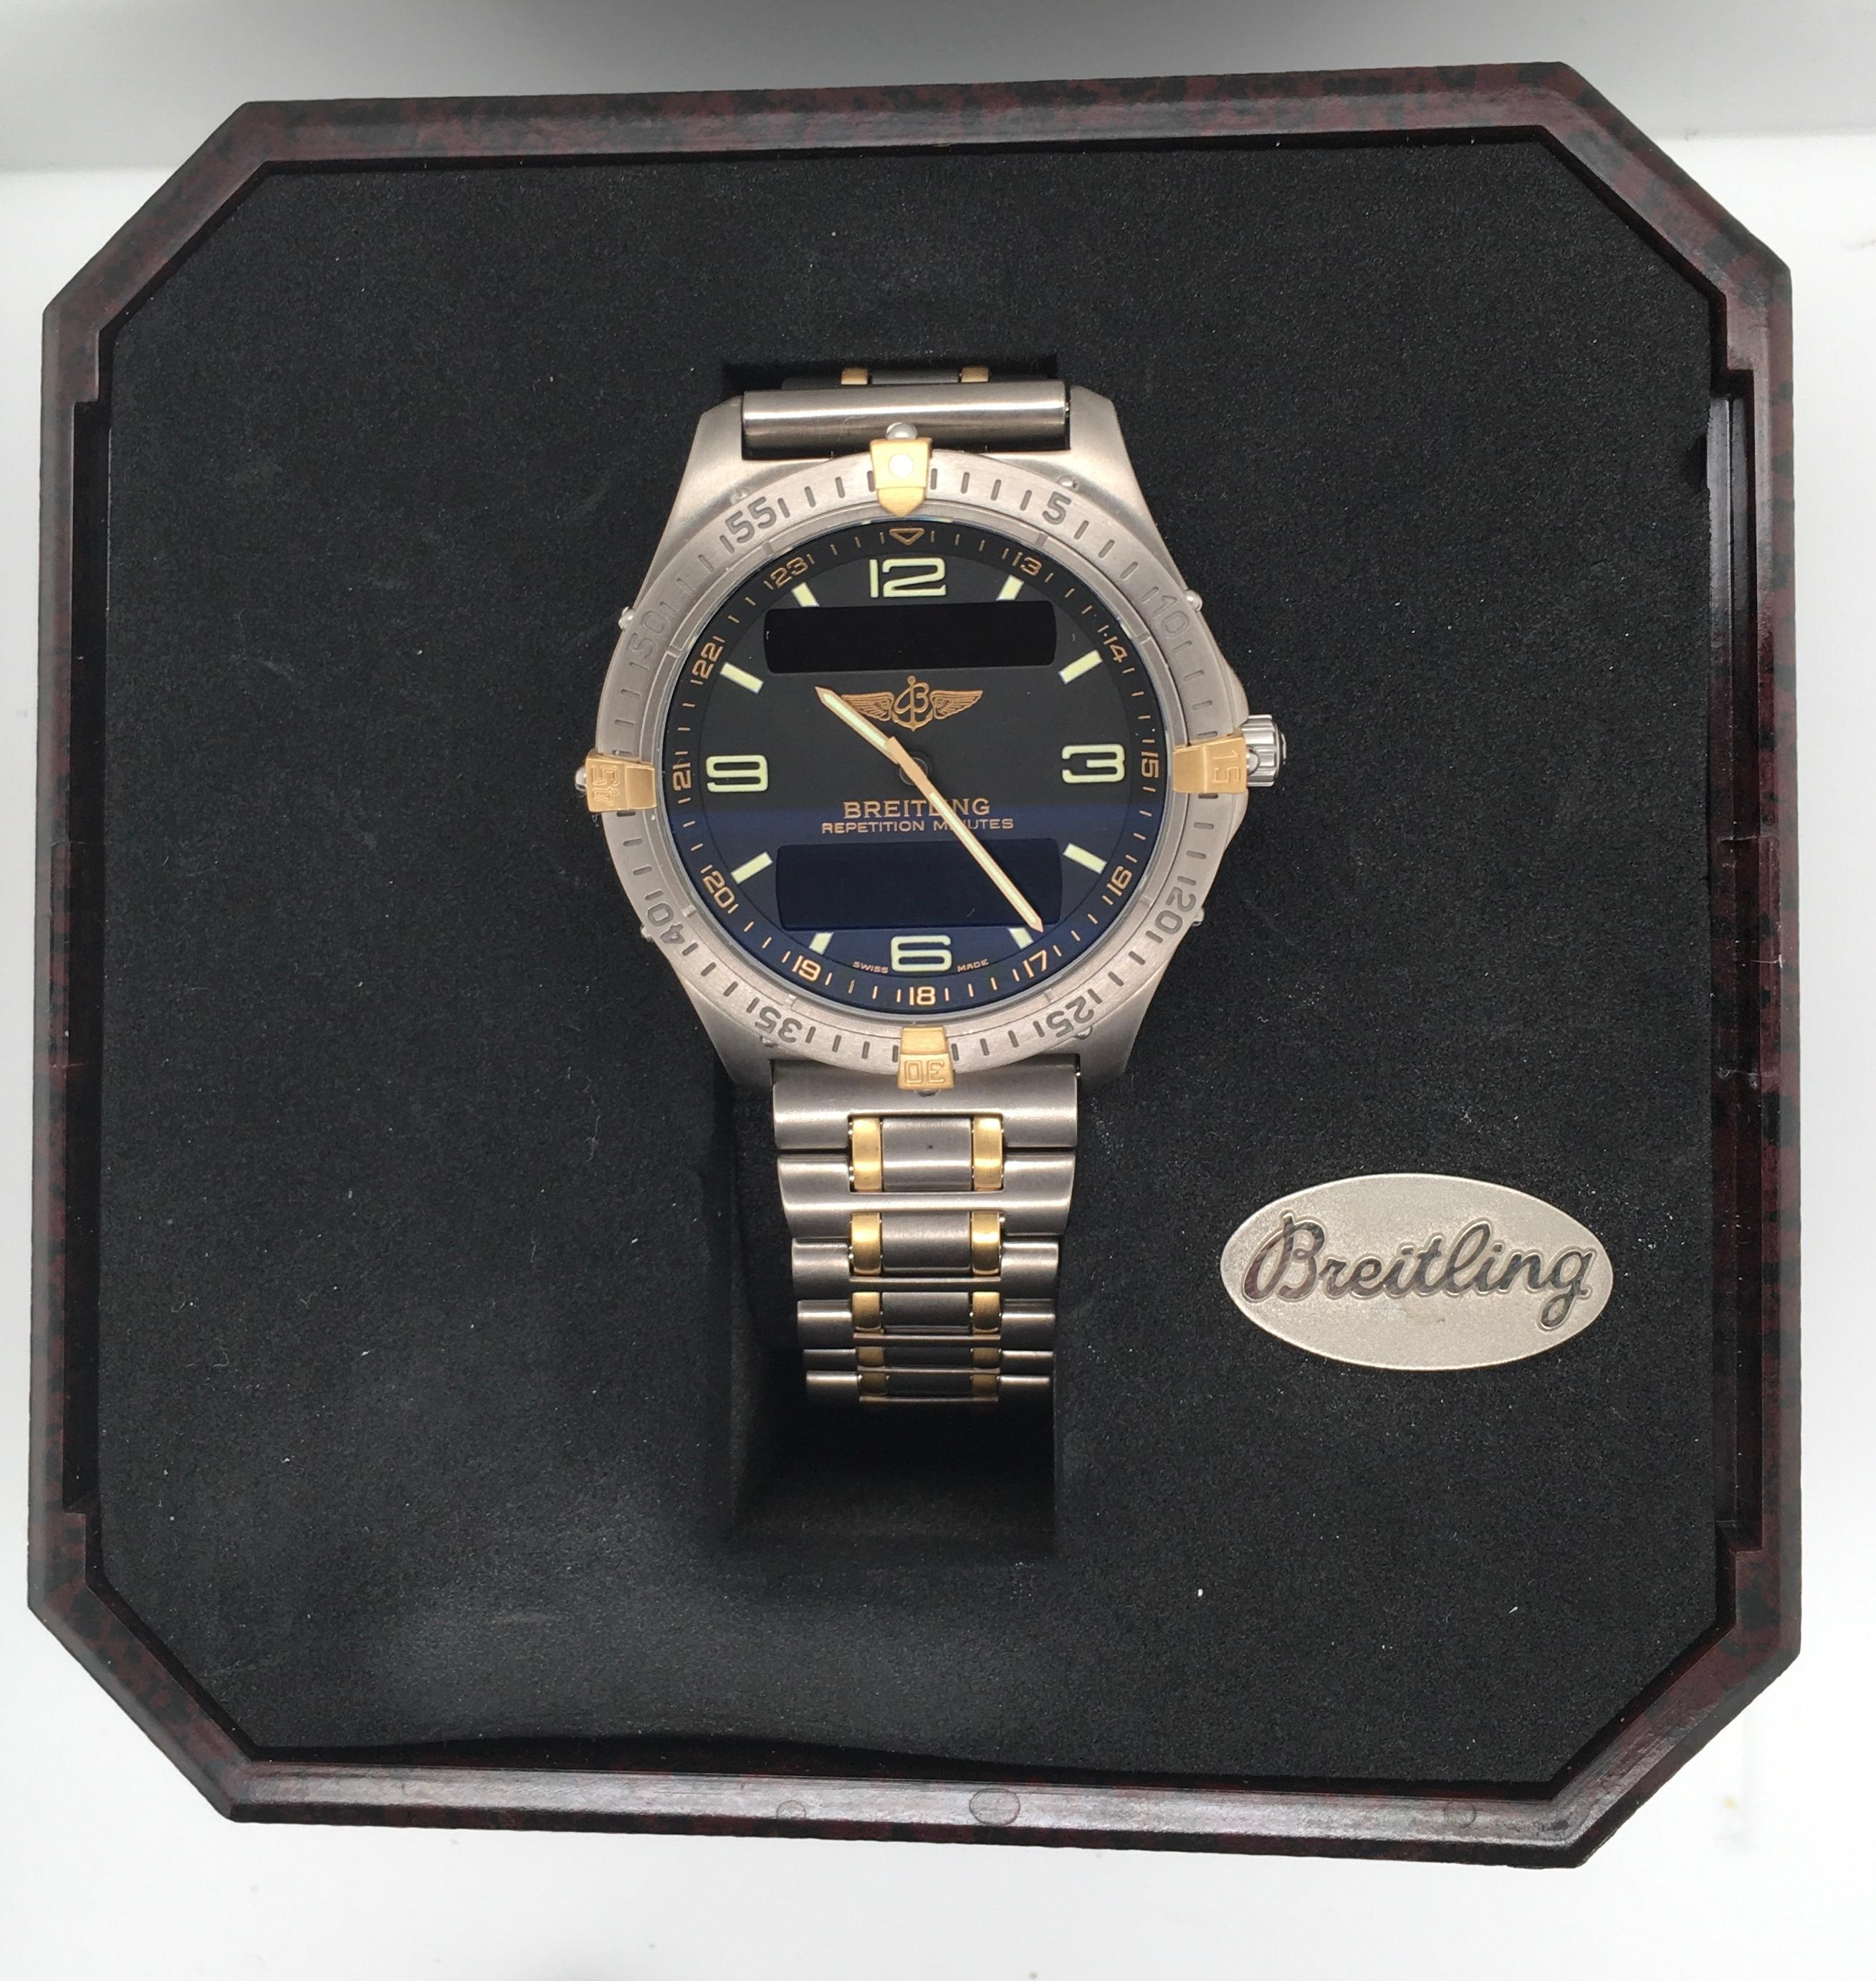 A striking Breitling Aerospace Repetition Minutes chronograph with titanium case, 18kt bezel and Arabic numerals on a black dial. This never-worn 100 meter water resistant model features a matching silver-colored titanium bracelet, steel clasp and a